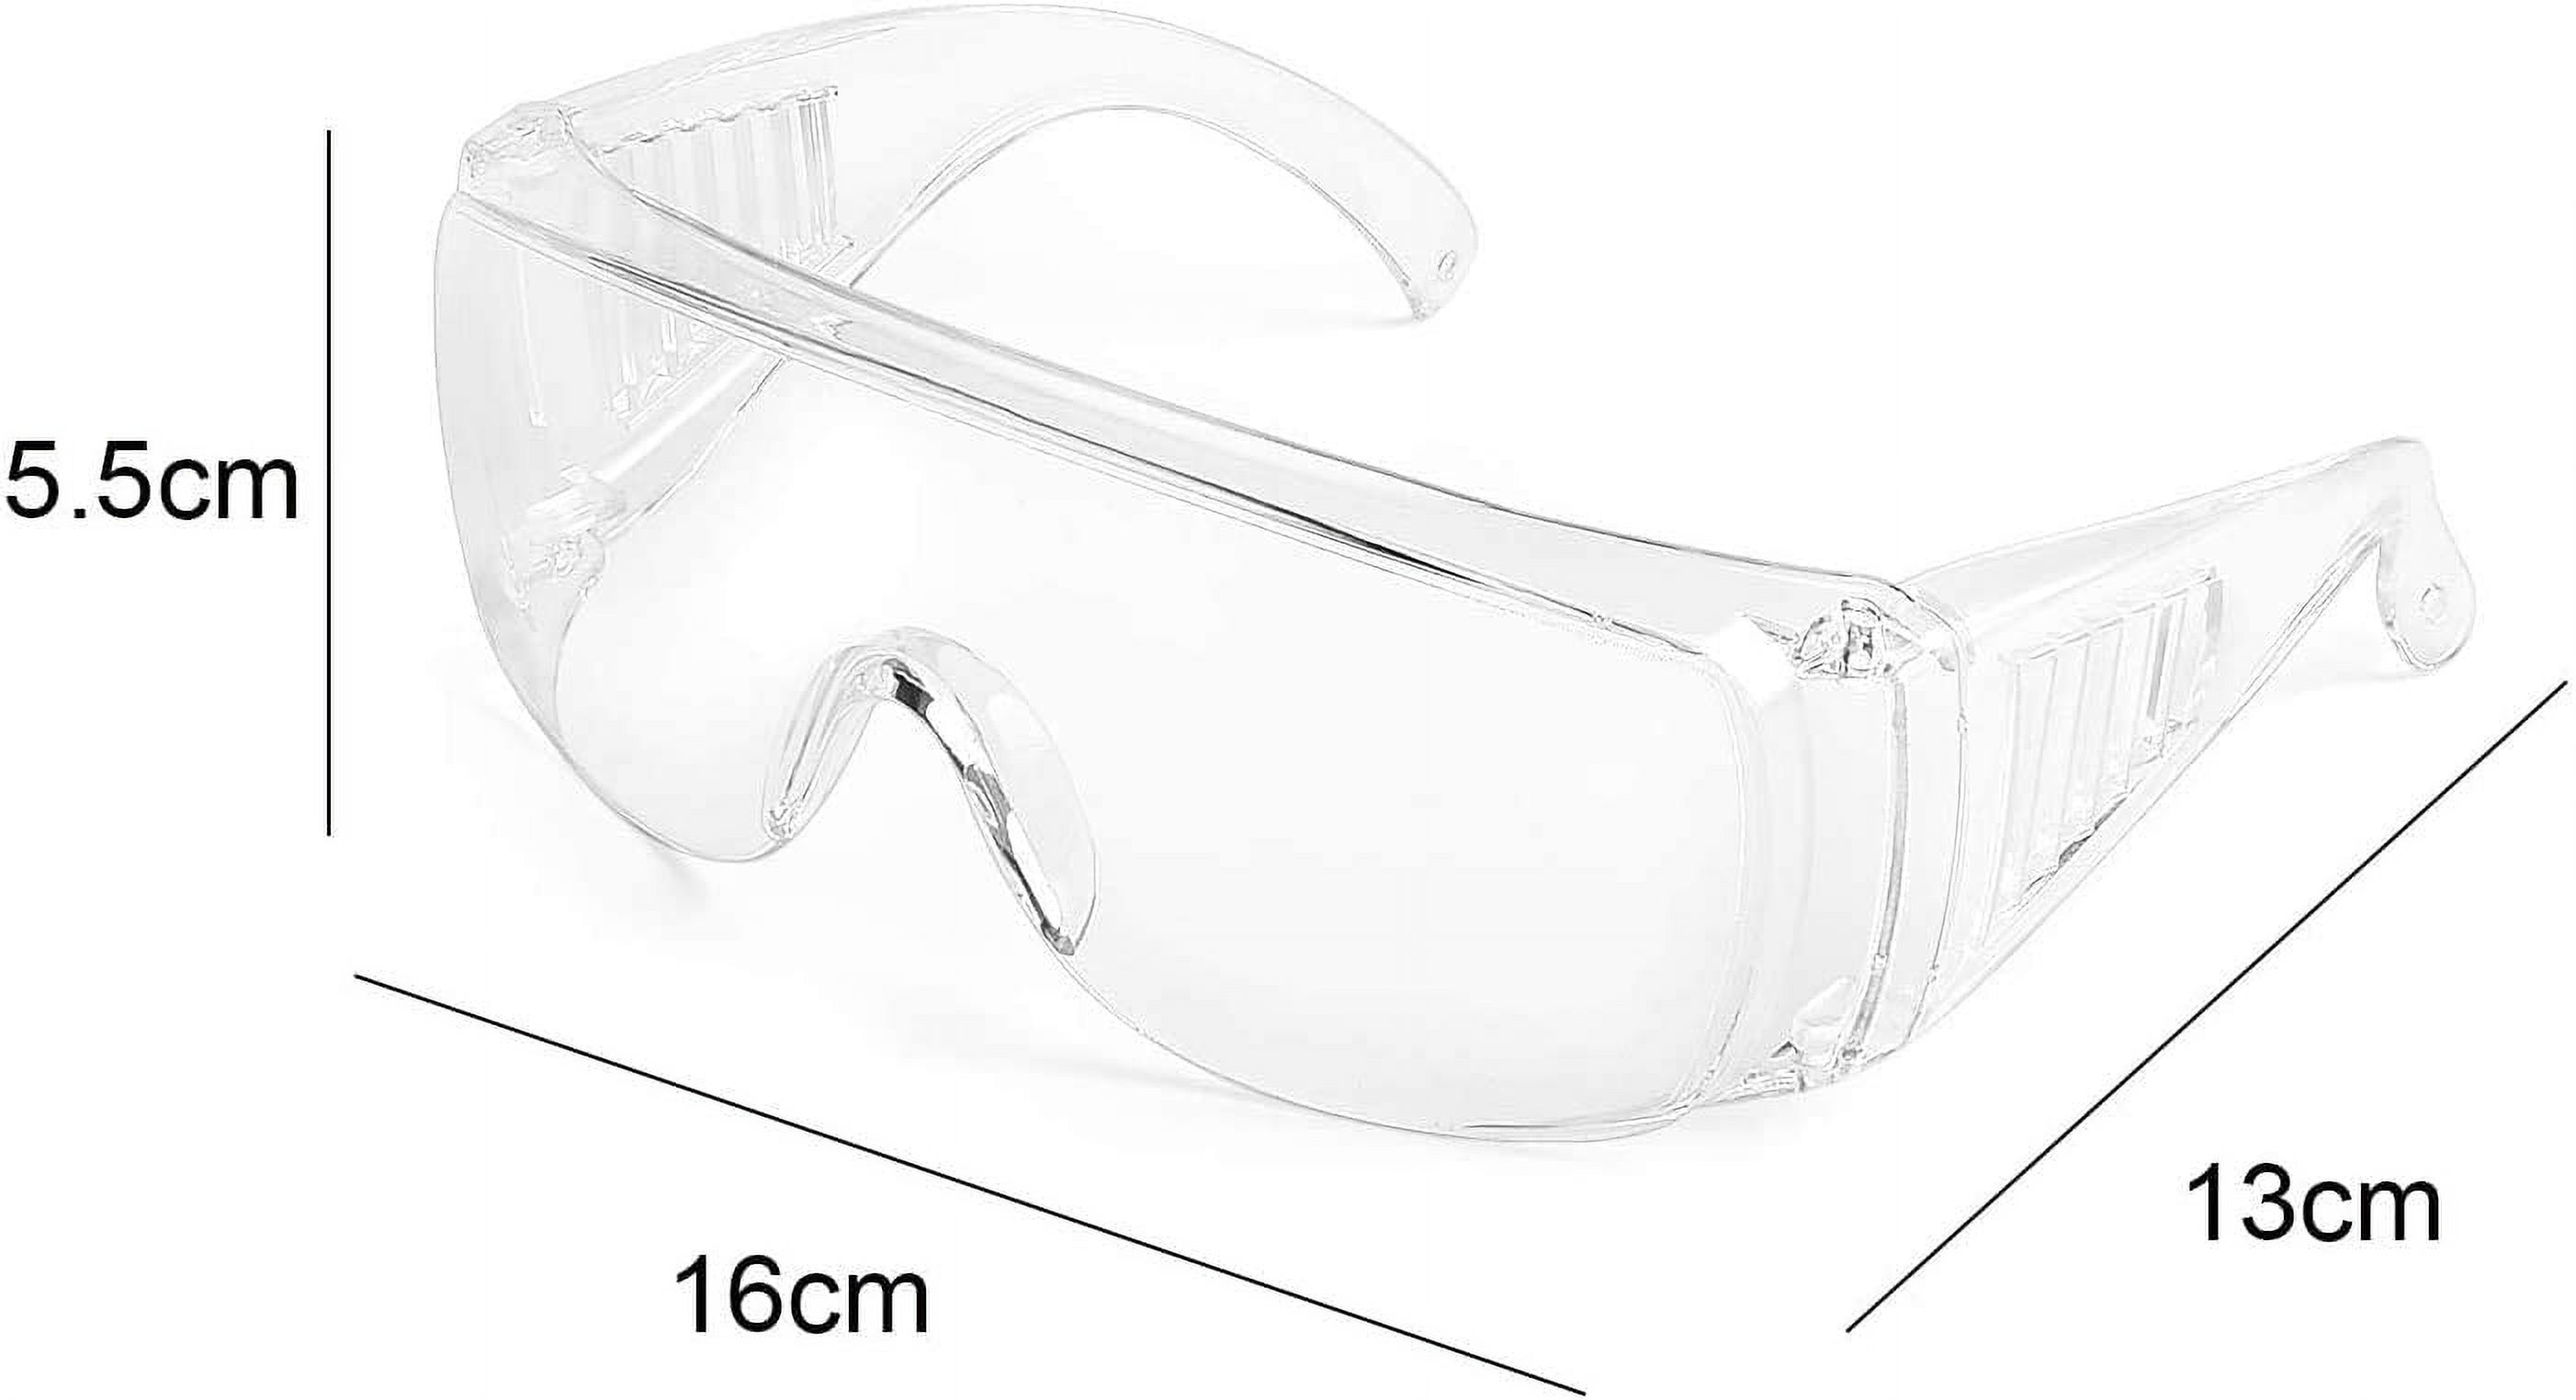 Alrisco Protective Eyewear Safety Goggles Clear Anti-fog Anti-Scratch Safety Glasses over Prescription Glasses, Transparent Frame Light Weight and Comfortable - image 4 of 7